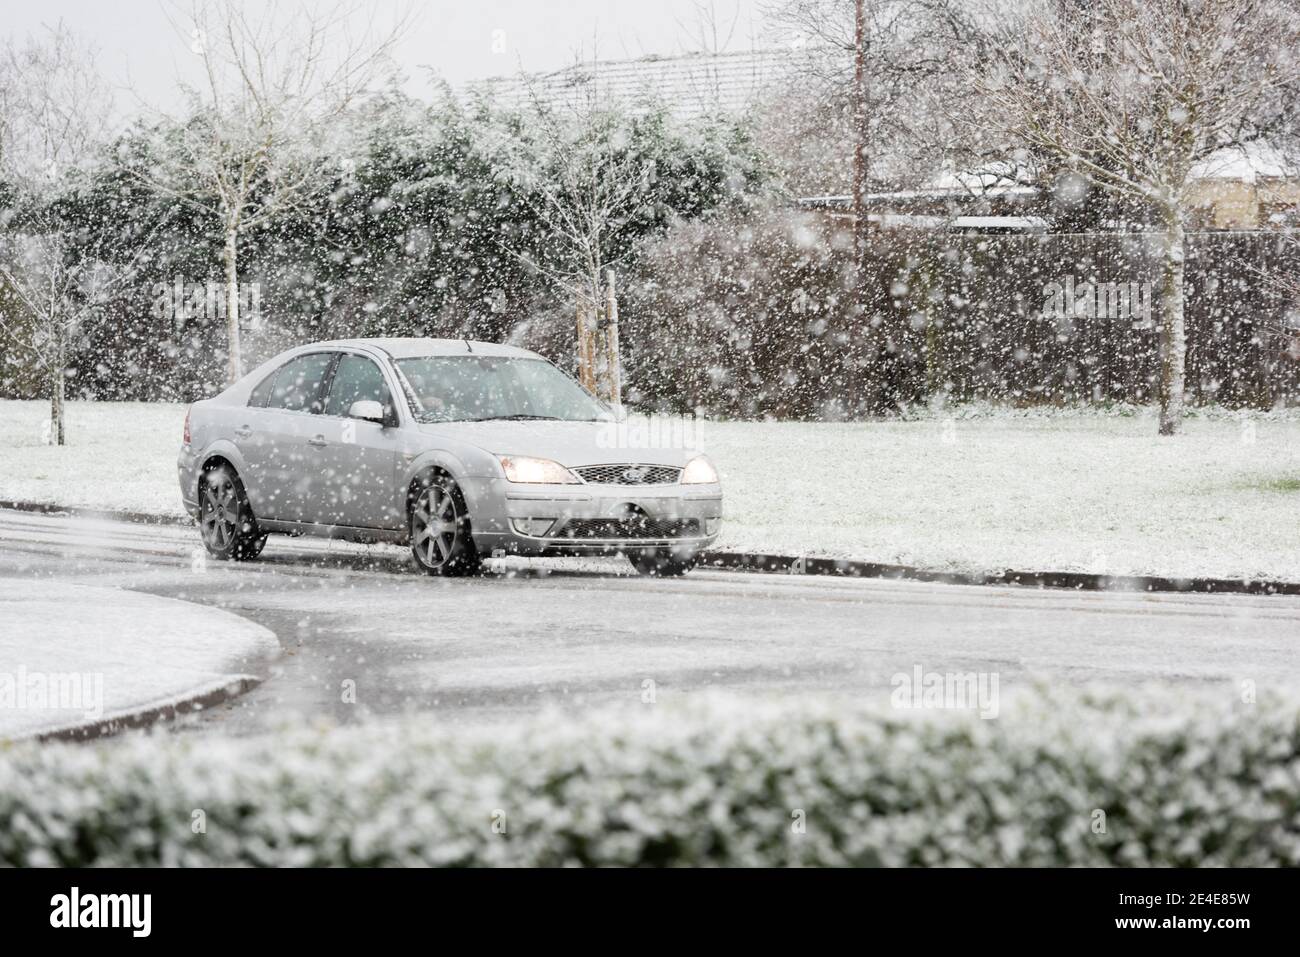 Willingham Cambridgeshire, UK. 23rd Jan, 2021. A heavy snow shower falls in East Anglia in cold winter weather. Further snowfall is forecast across parts of the UK with freezing temperatures over the next few days. Credit: Julian Eales/Alamy Live News Stock Photo